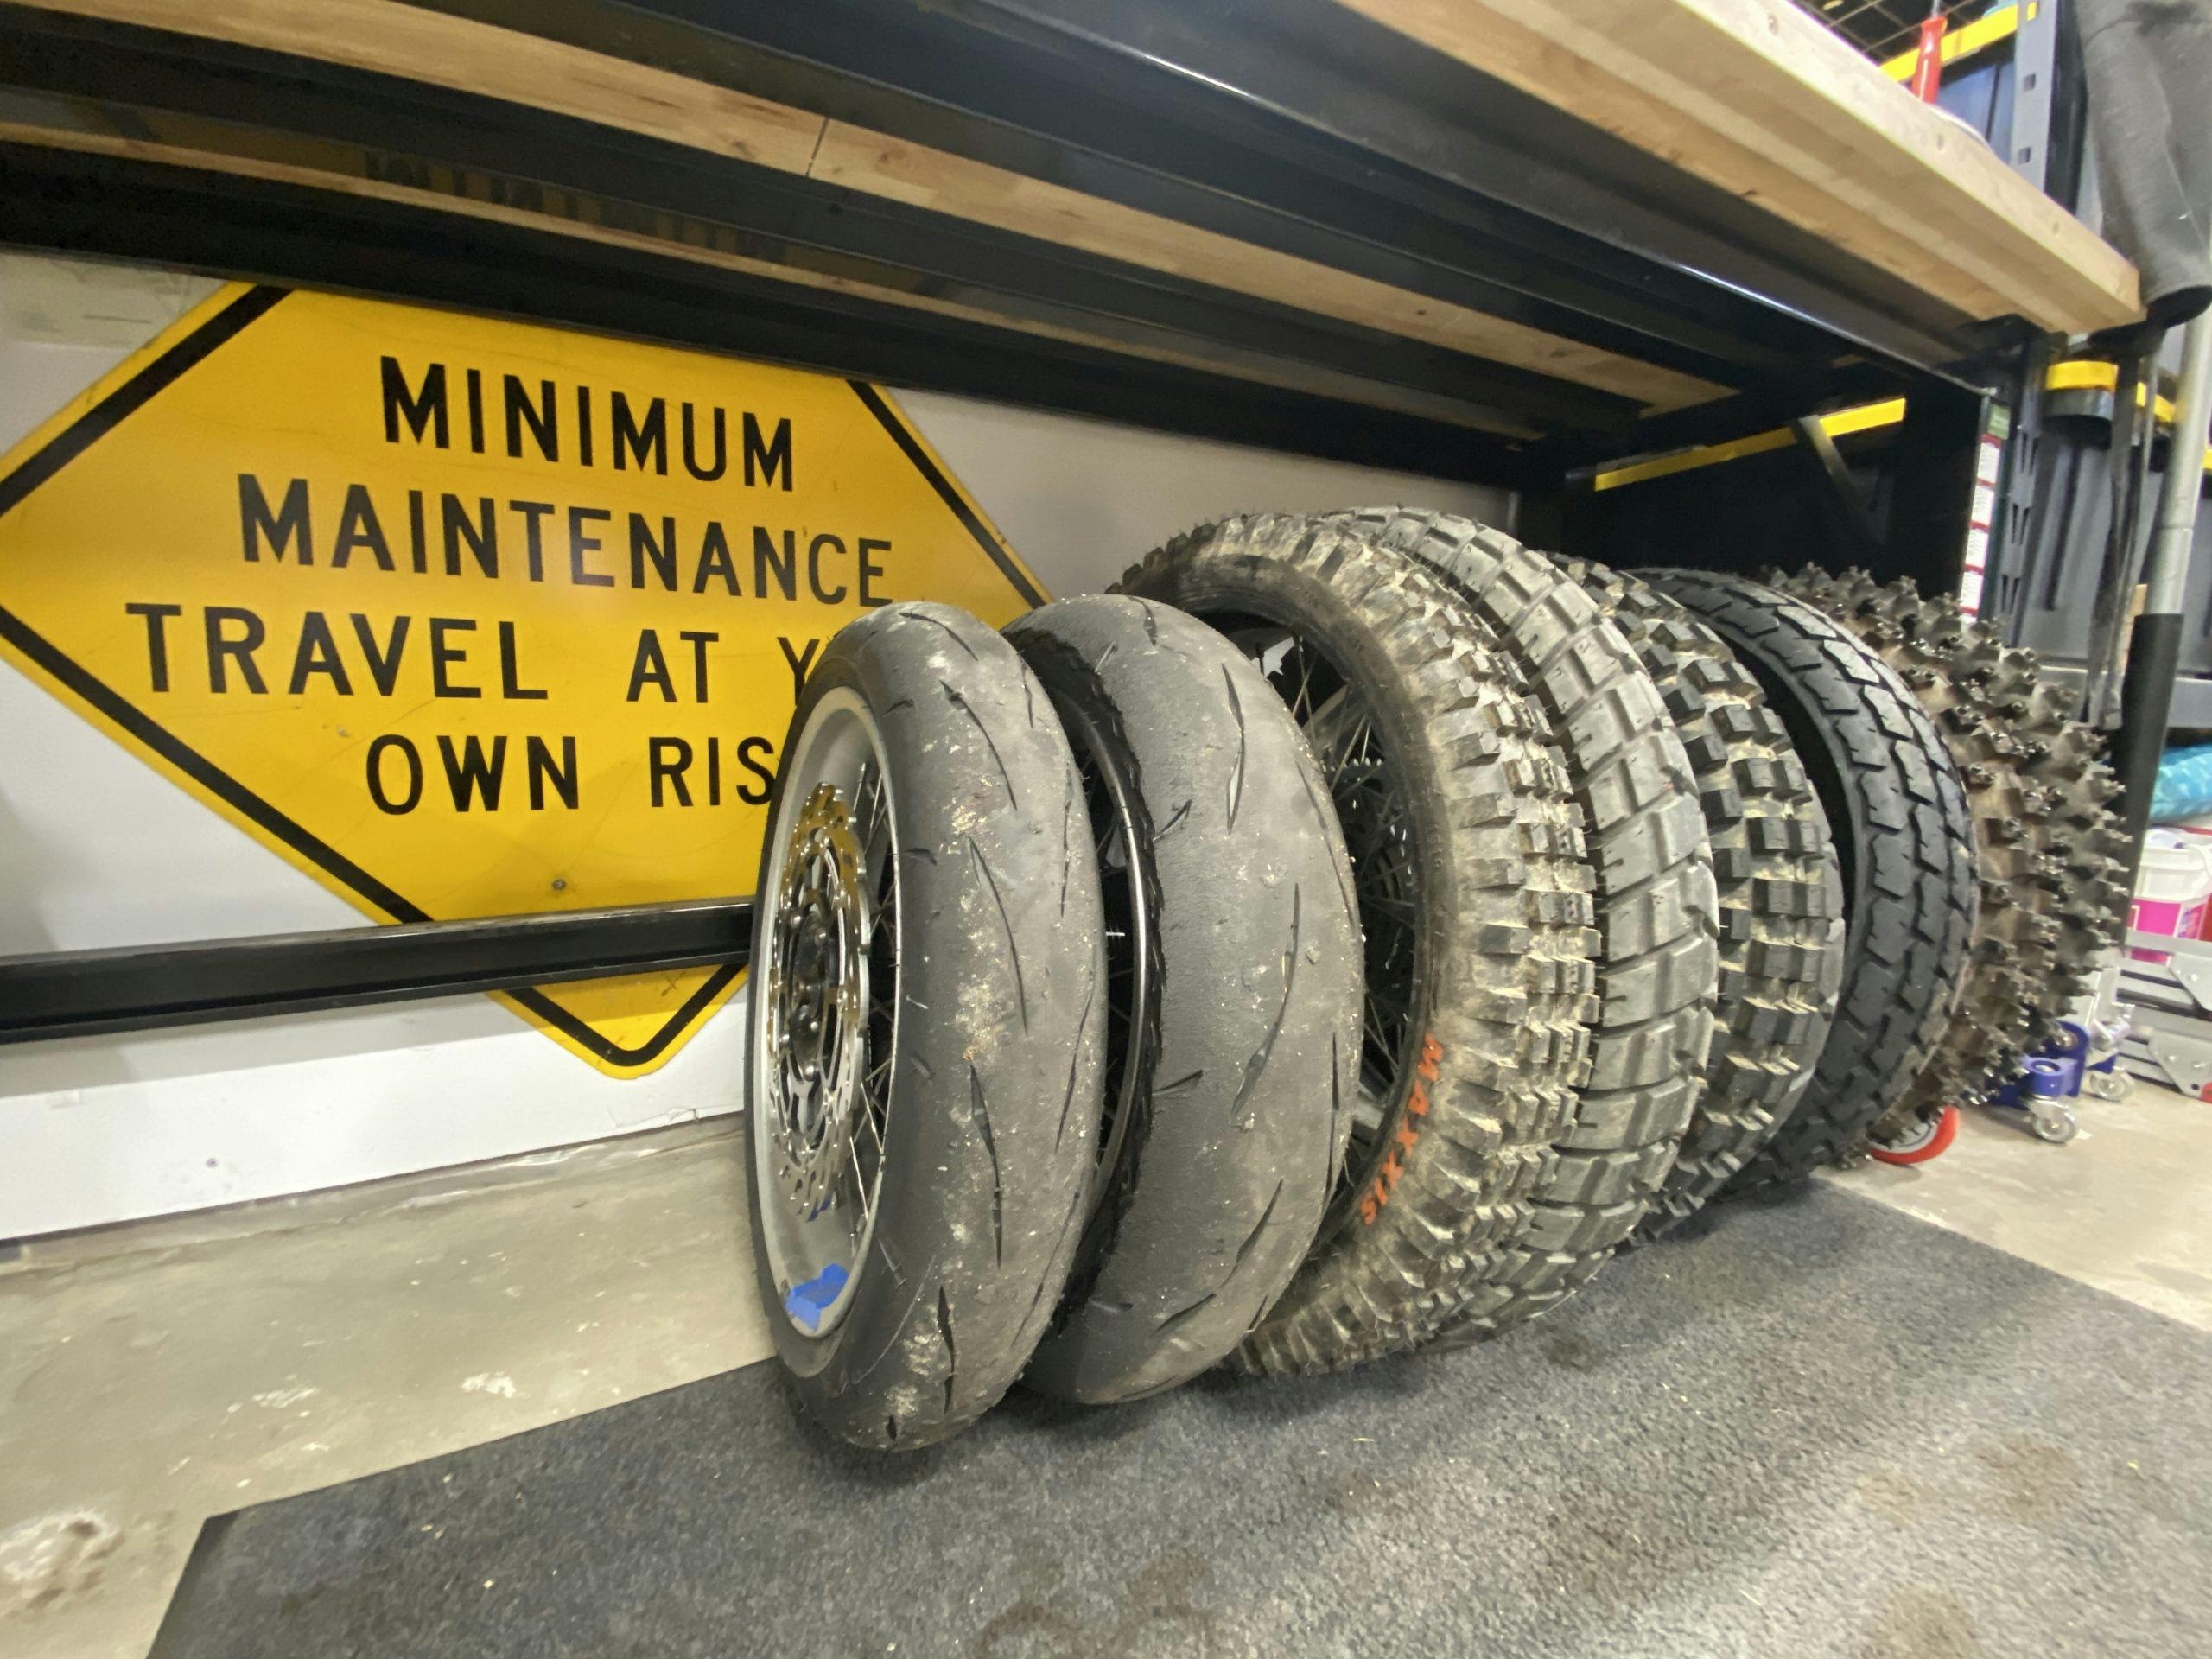 8 Reasons Why Tires Wear From Inside – And How to Fix it – Engineerine